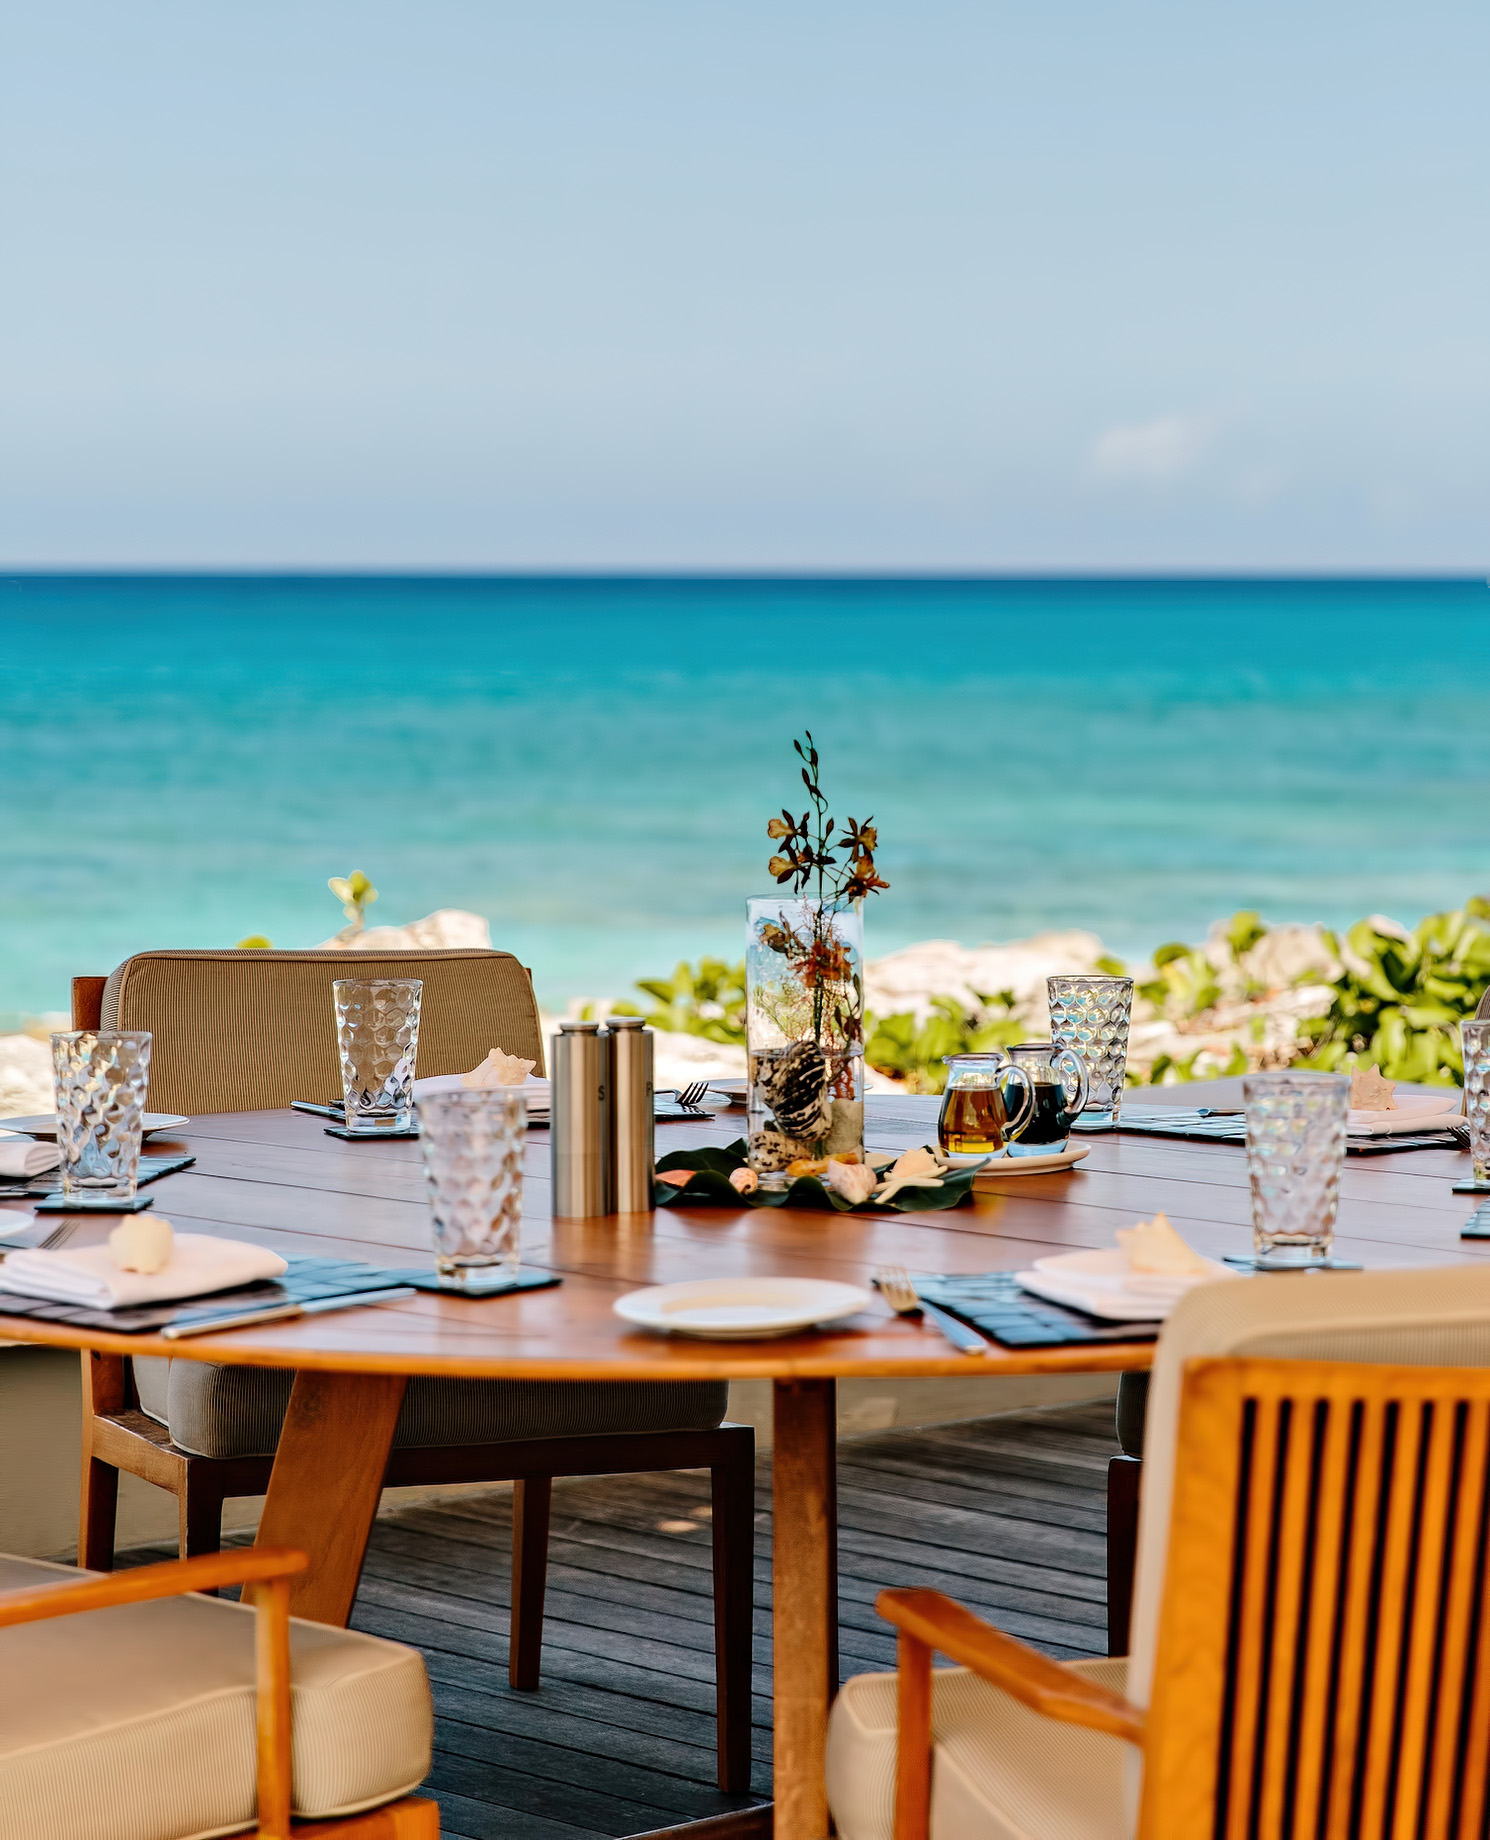 Amanyara Resort – Providenciales, Turks and Caicos Islands – Oceanfront Tropical Dining